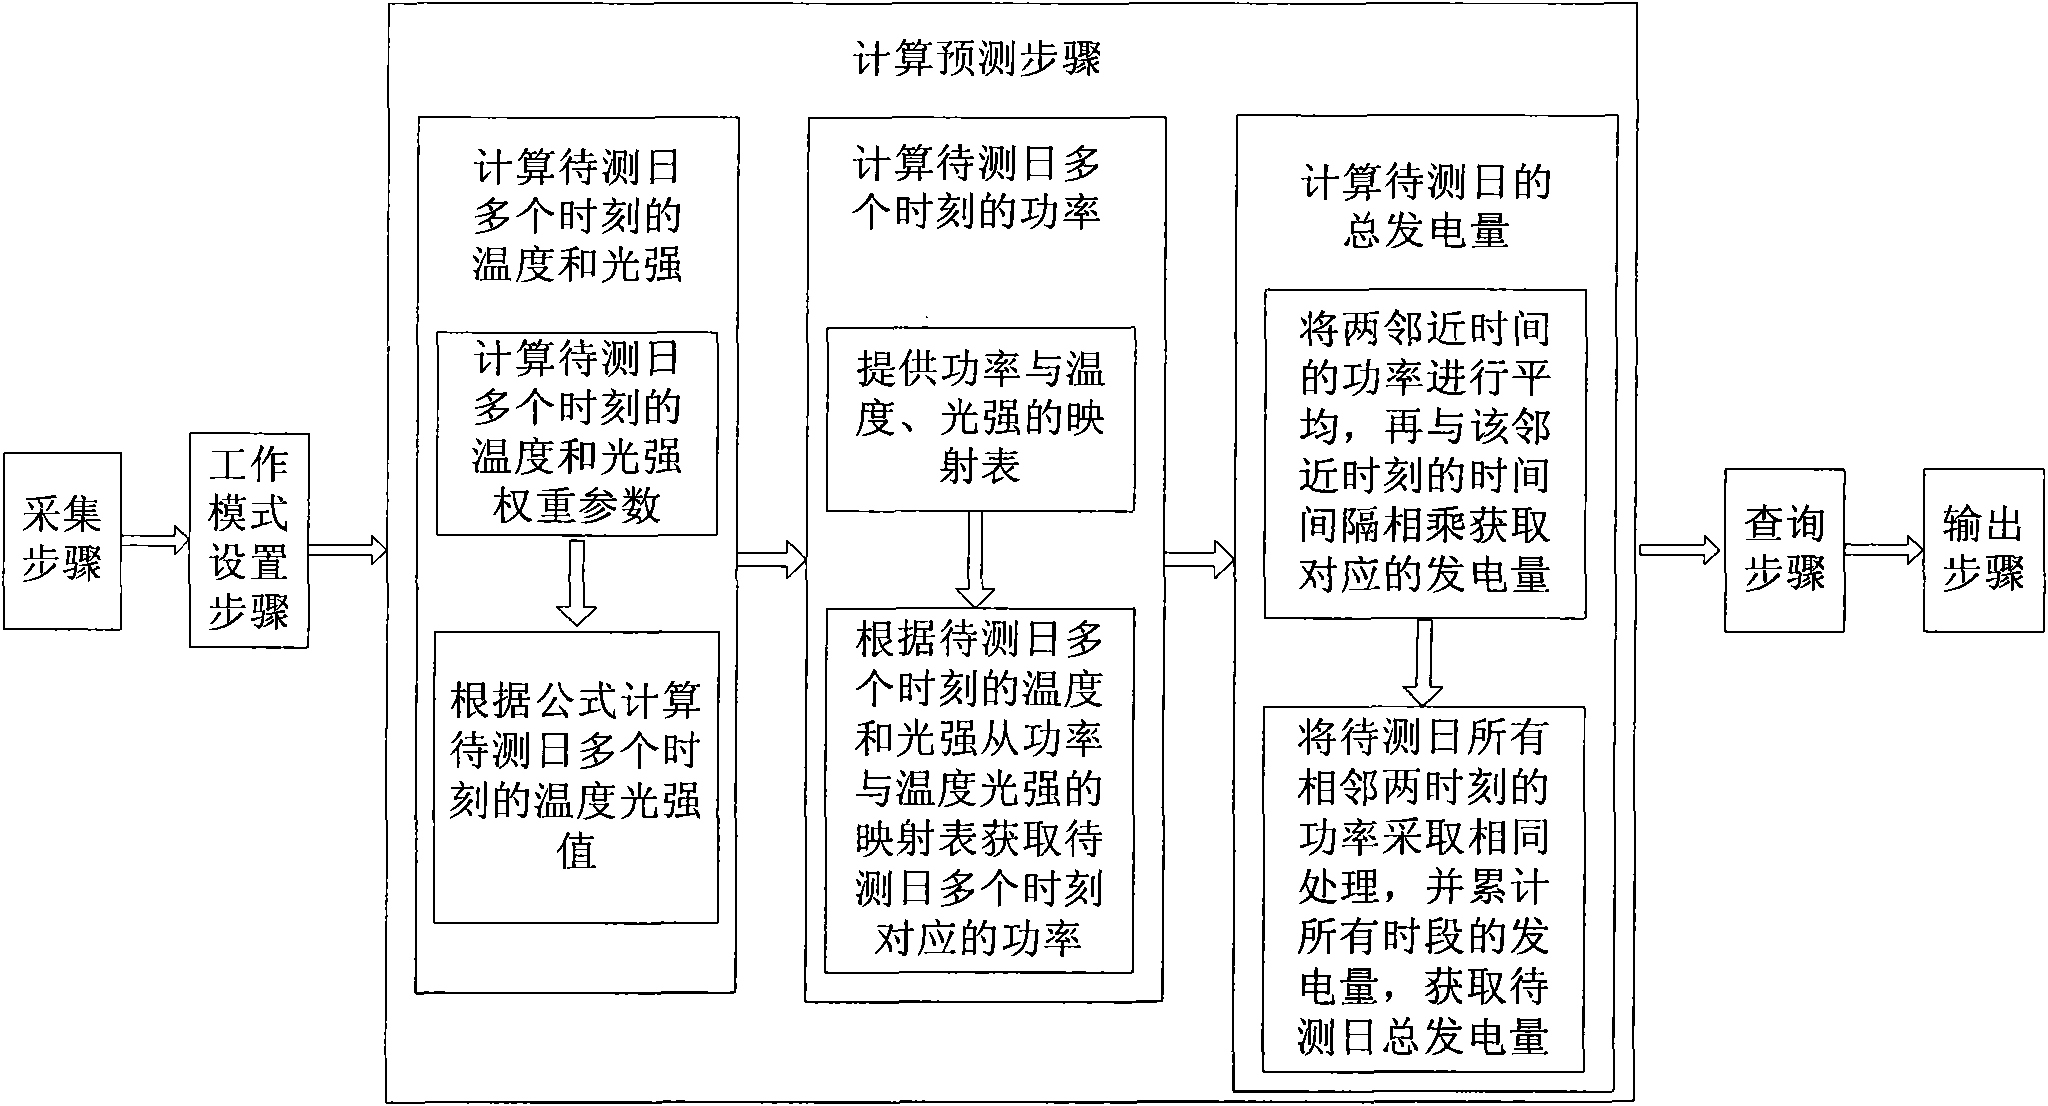 Solar photovoltaic cell power generating capacity prediction system and method